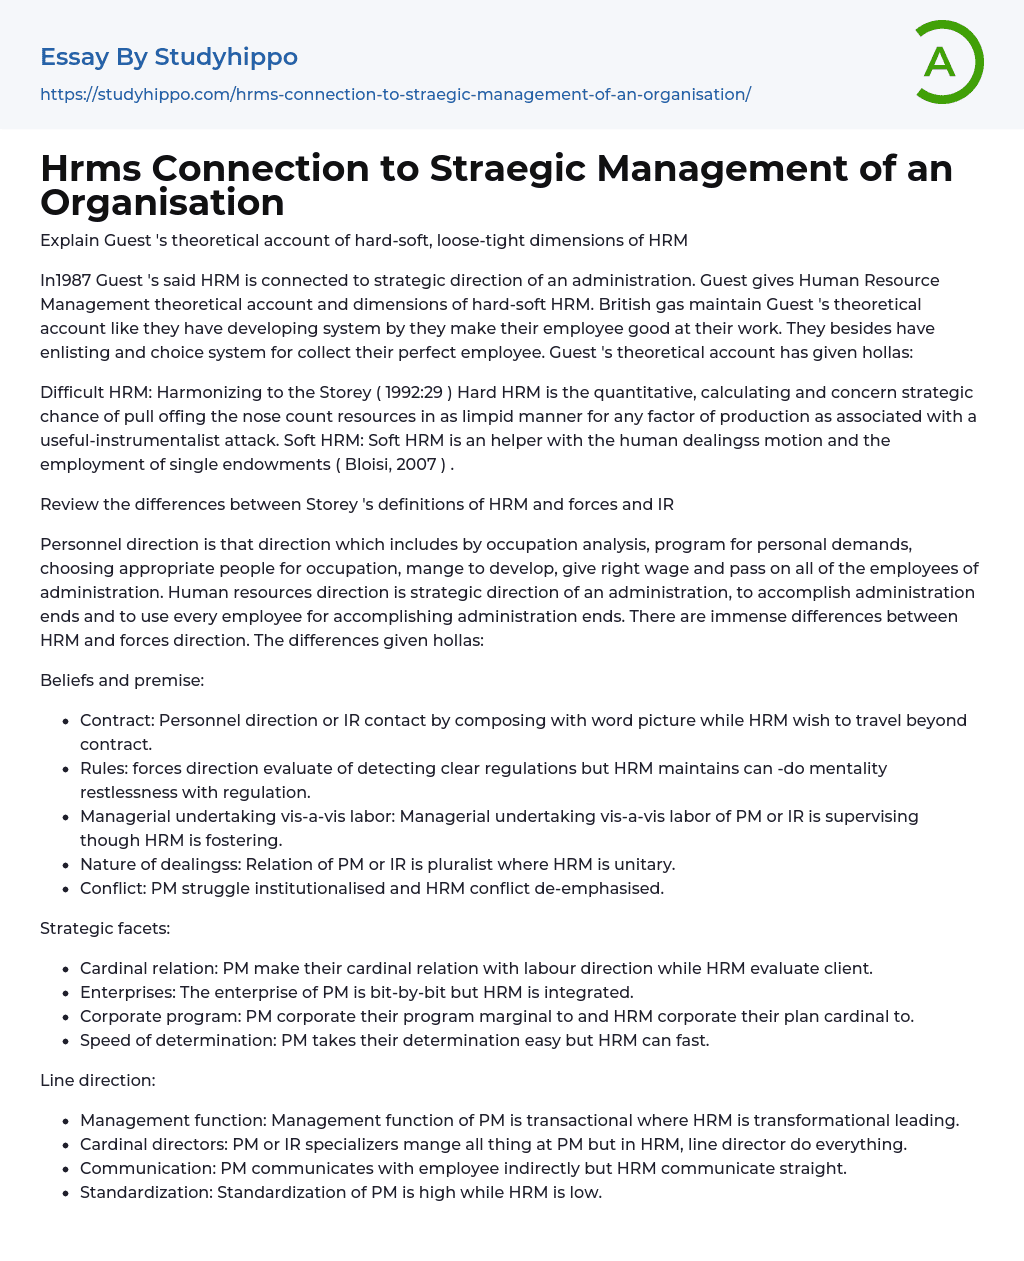 Hrms Connection to Straegic Management of an Organisation Essay Example